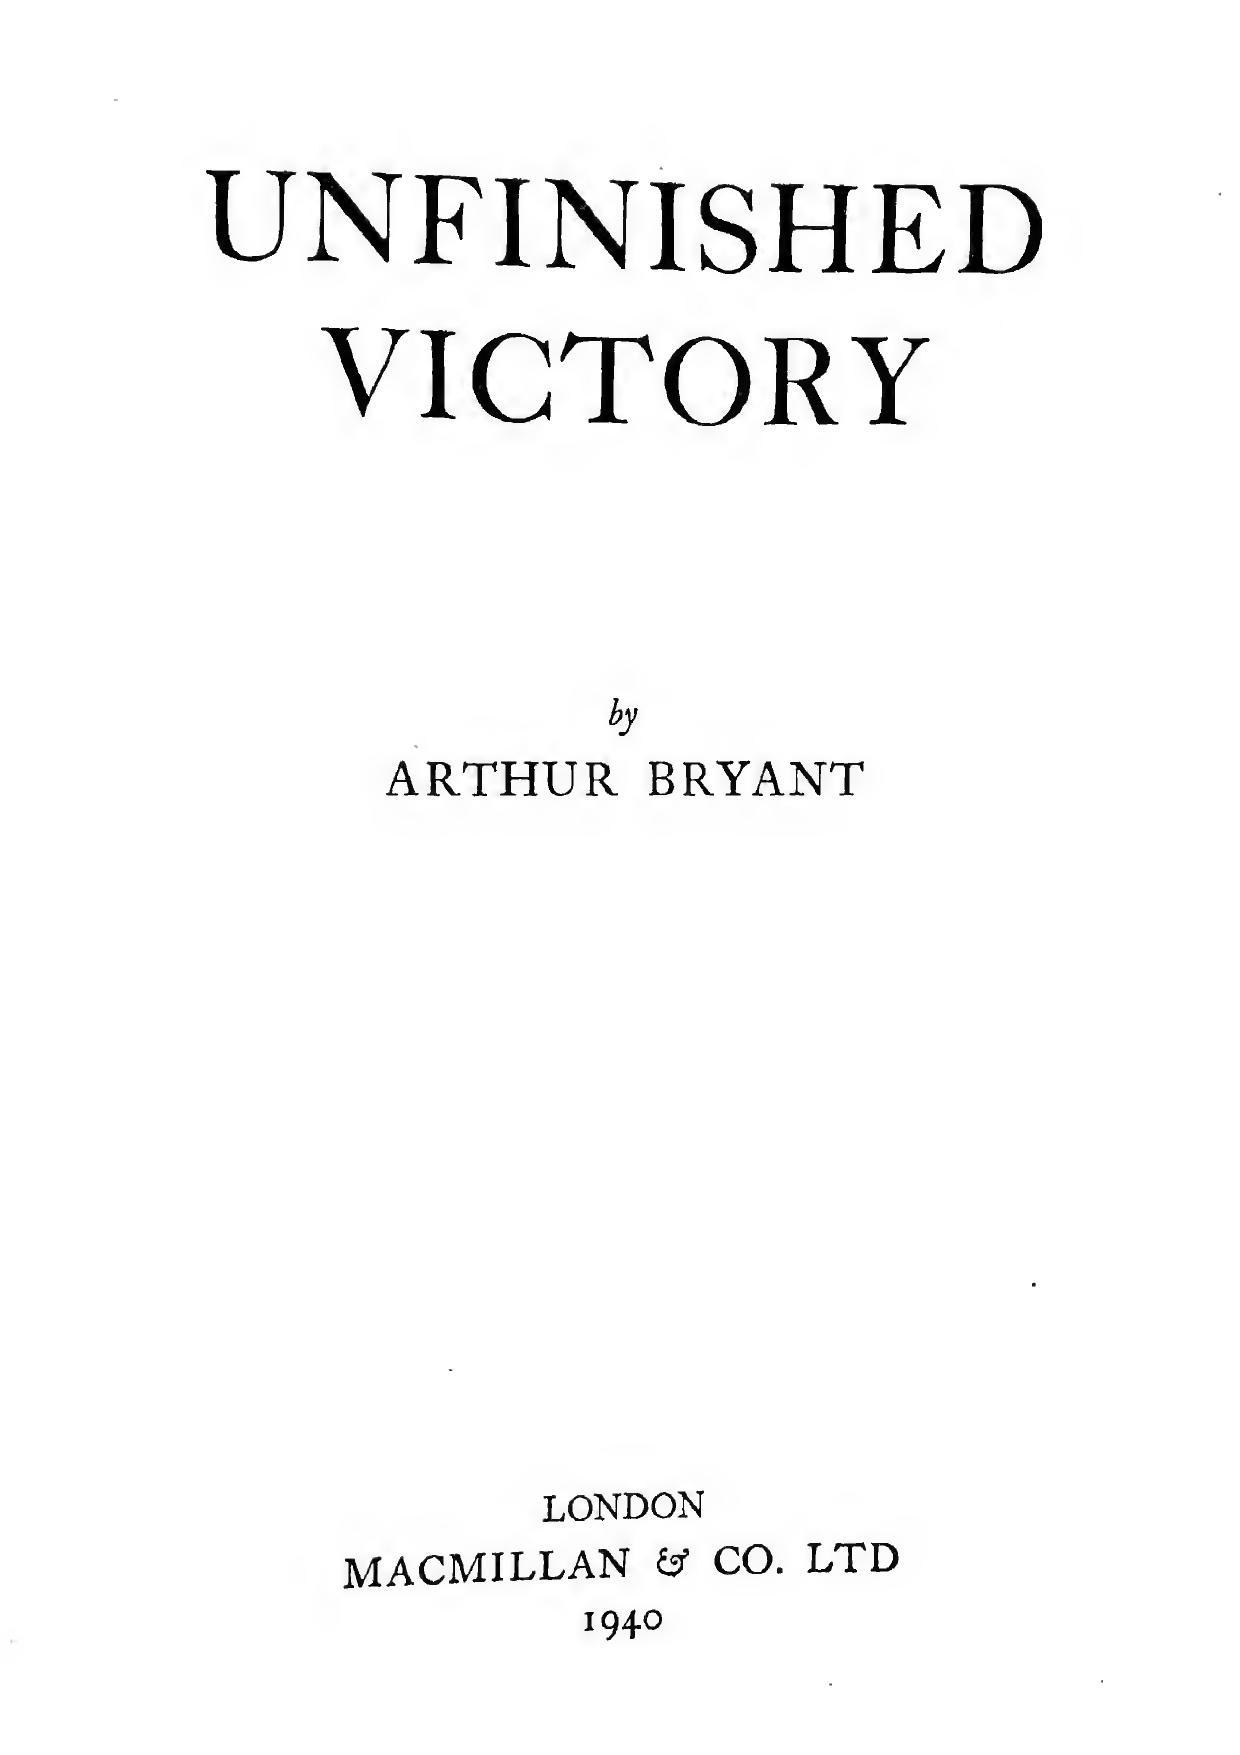 Unfinished Victory (1940) by Arthur Bryant